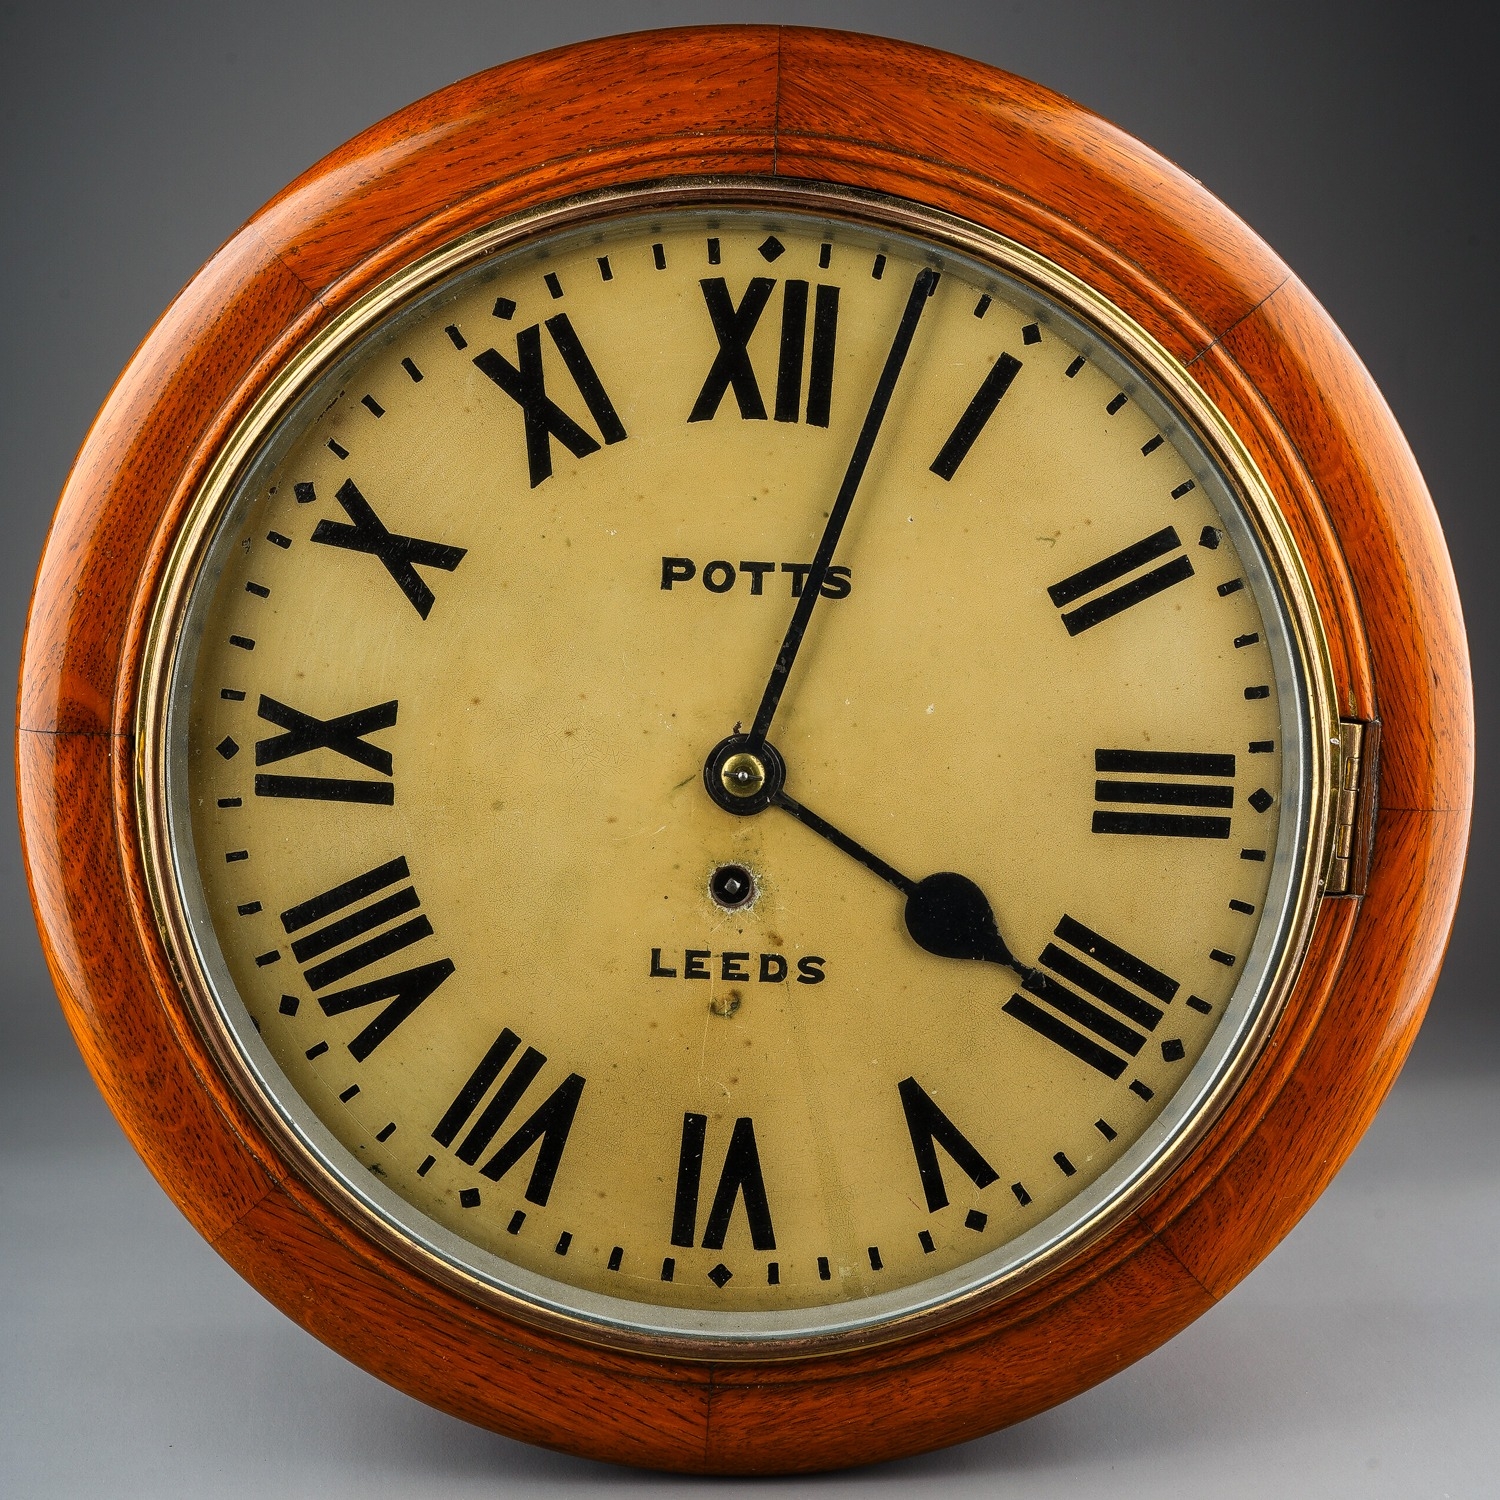 Wall Clock by Potts of Leeds in a wooden mahogany case, with Roman numerals on the dial.